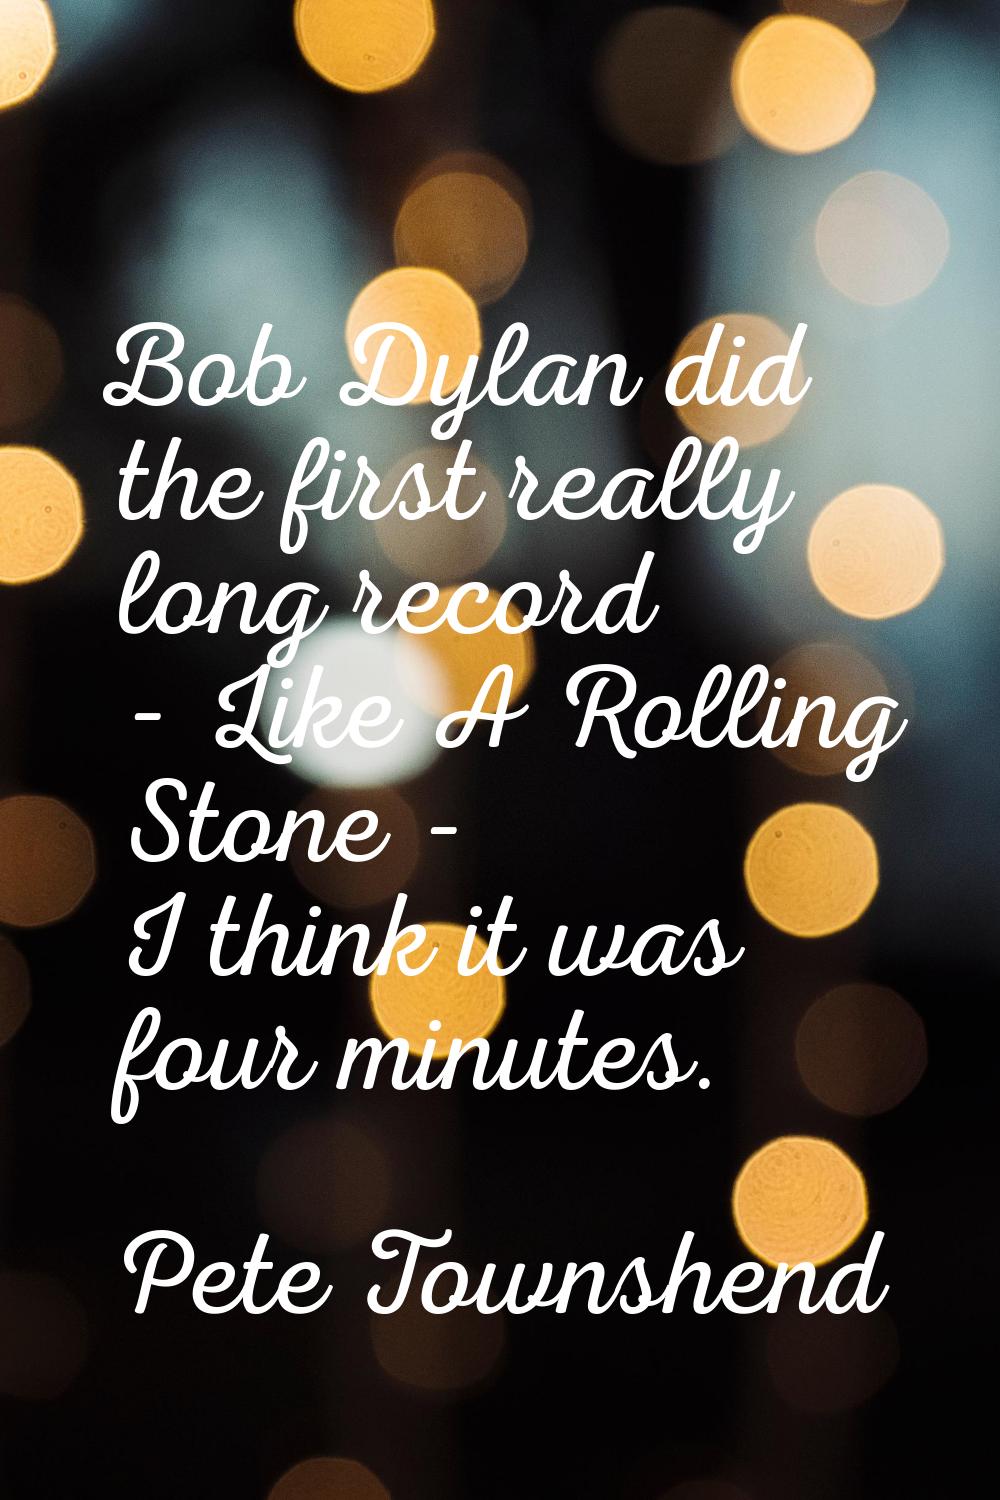 Bob Dylan did the first really long record - Like A Rolling Stone - I think it was four minutes.